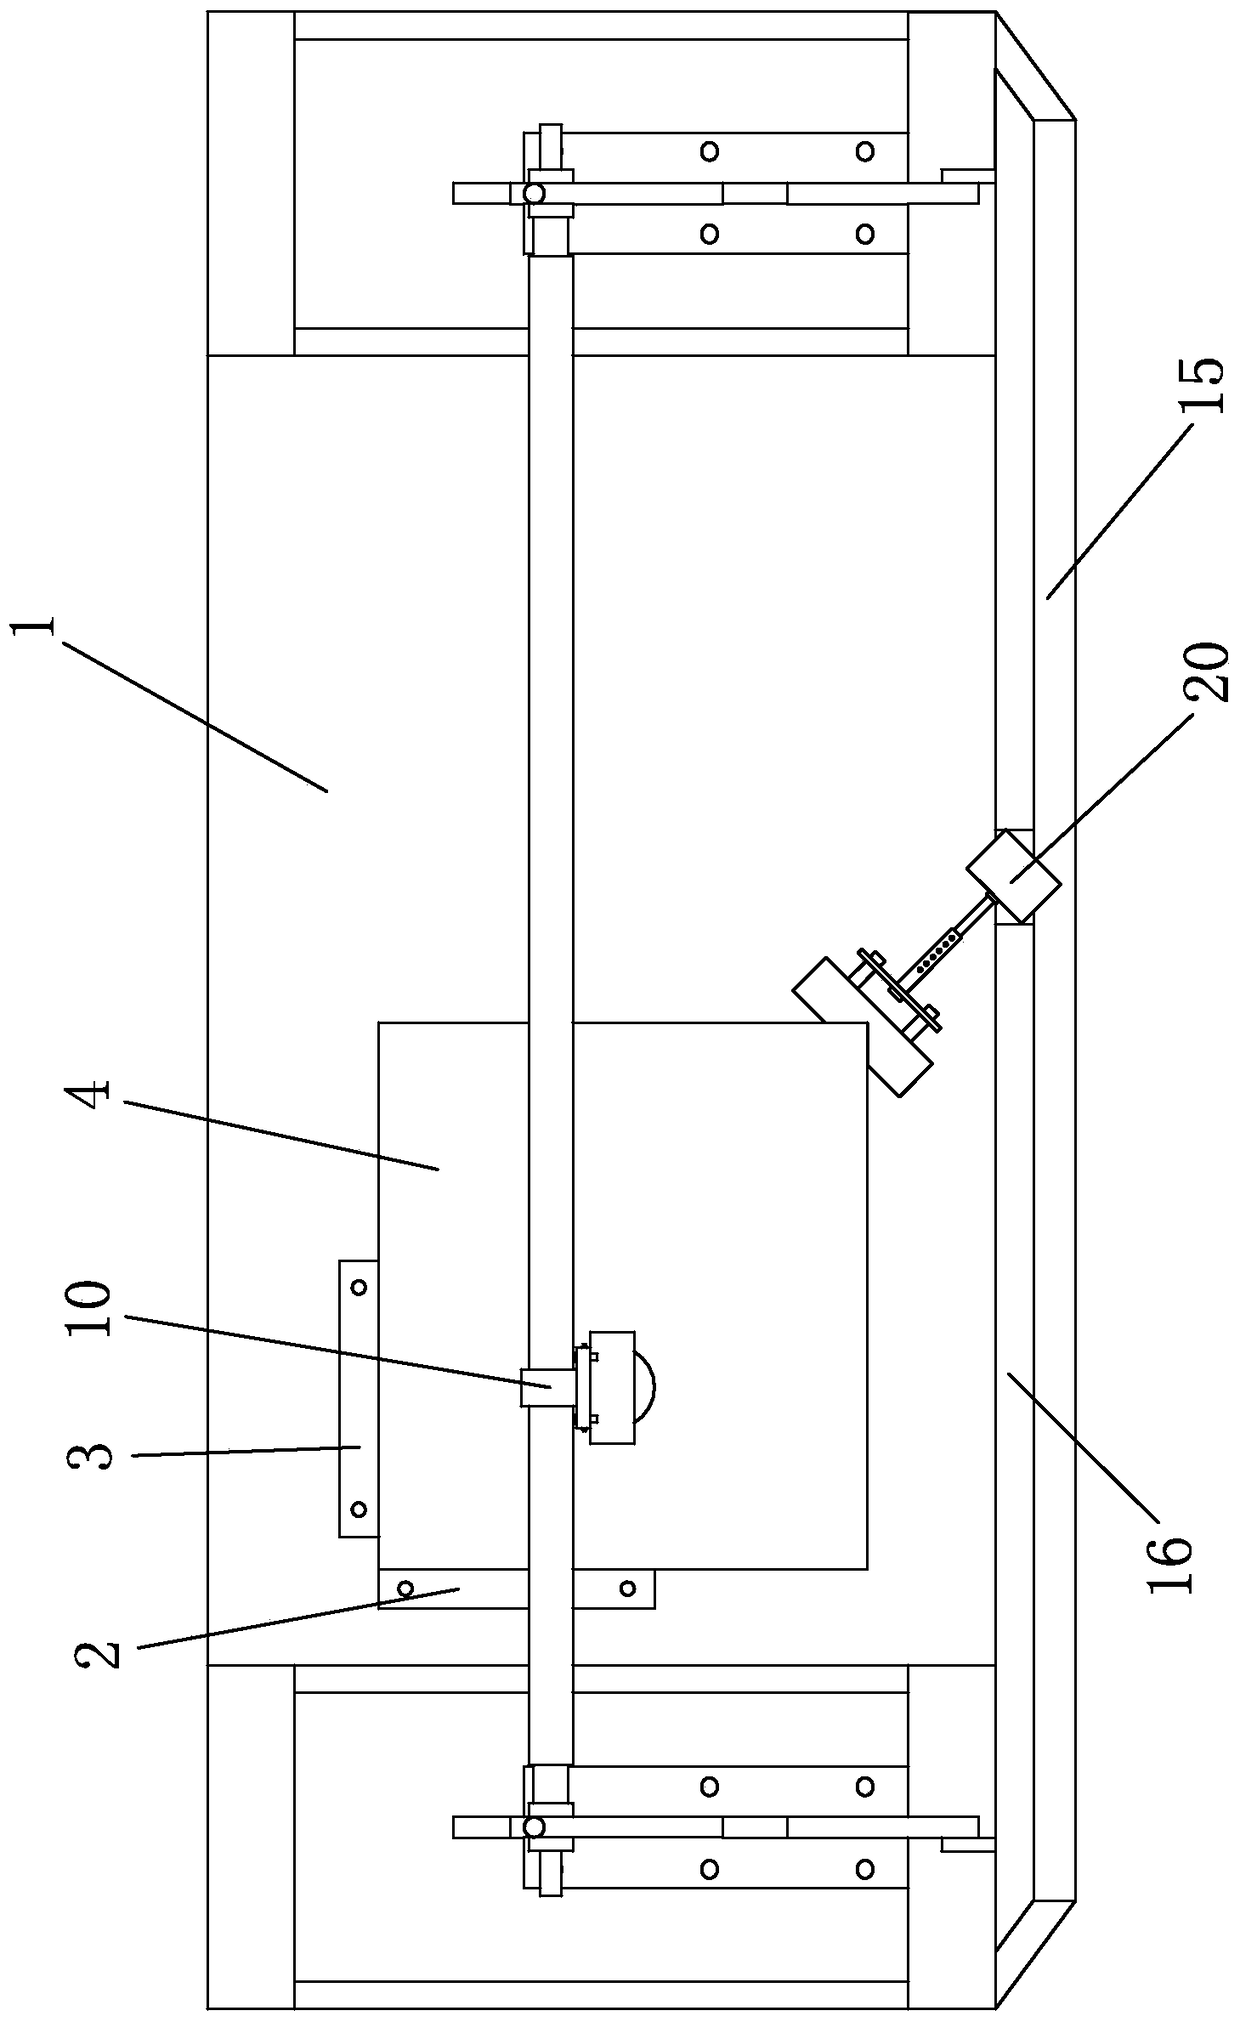 A Positioning and Fixing Mechanism for Drilling Wooden Boards